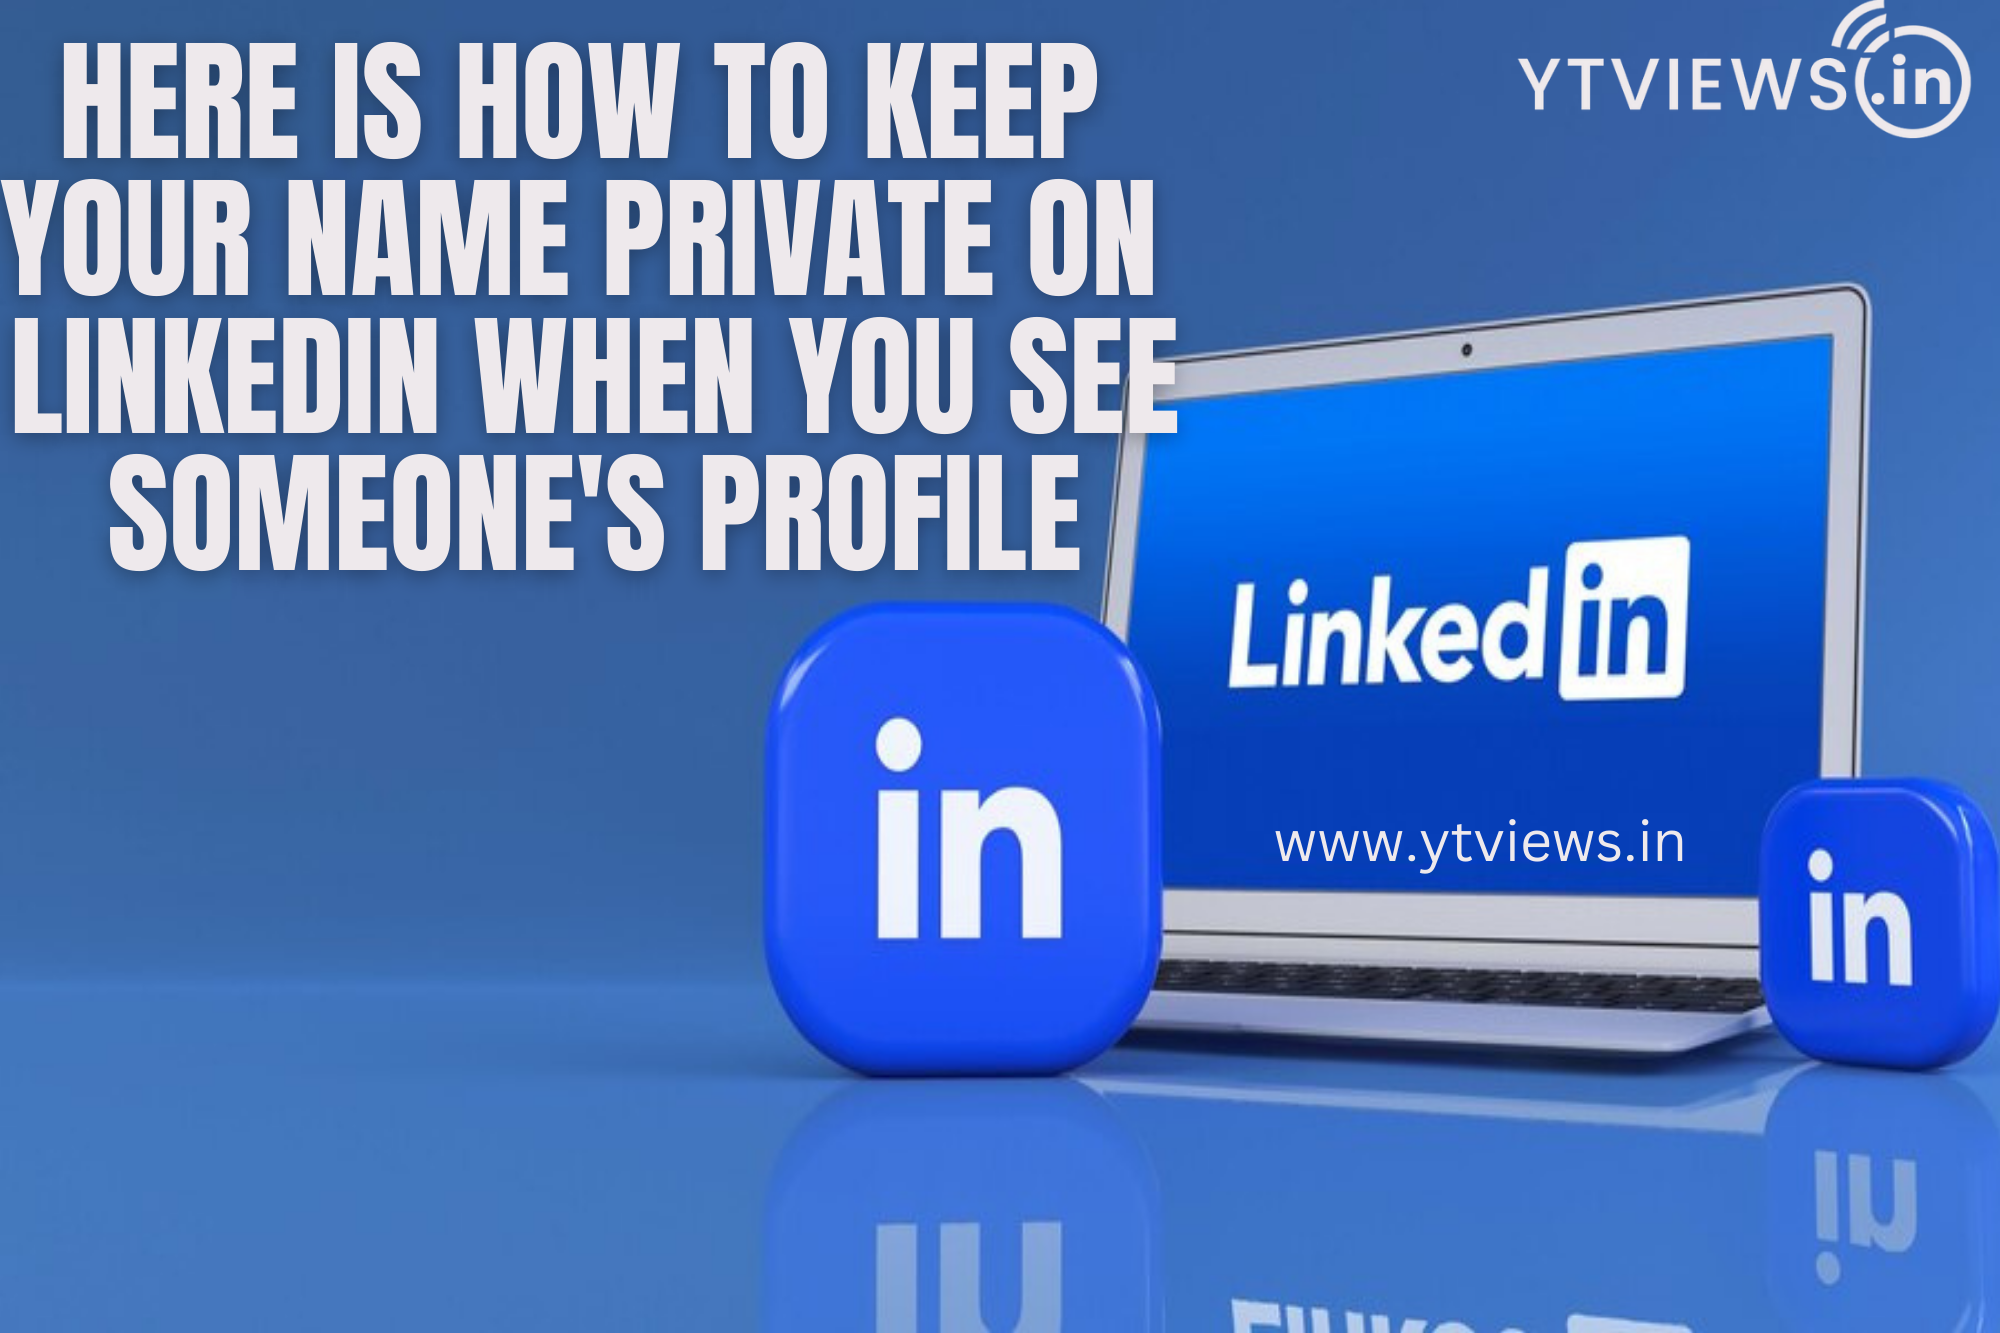 Here is How To Keep Your Name Private On LinkedIn When You See Someone’s Profile